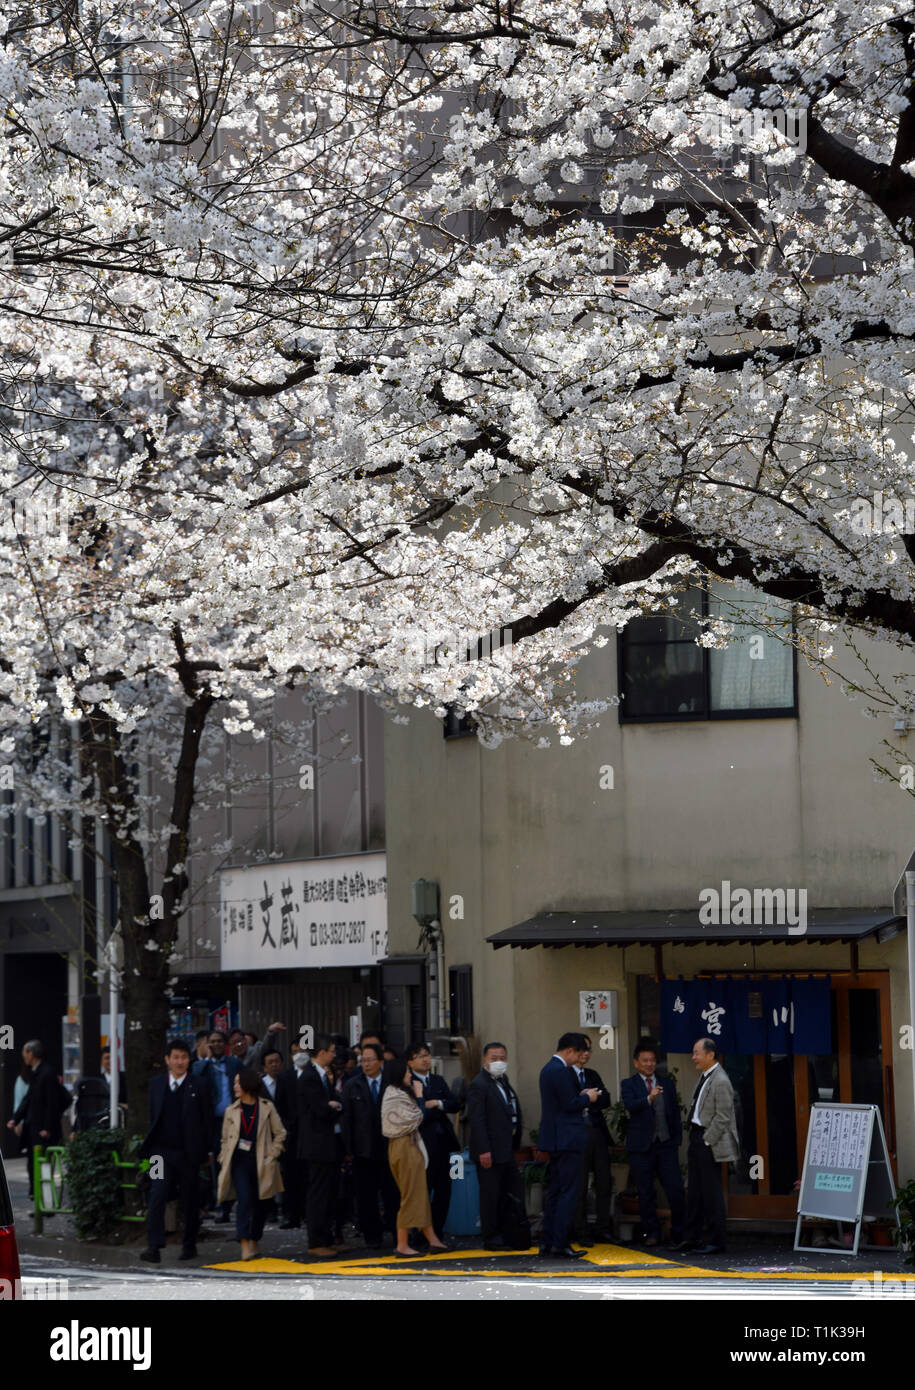 Tokyo, Japan. 27th Mar, 2019. Cherry blossoms are in full bloom along the streets of Kayabacho, a commercial district in the the heart of Tokyo on Wednesday, March 27, 2019. ?Japan Meteorological Agency announced the peak bloom of the cherry blossoms in the nation's capital. Credit: Natsuki Sakai/AFLO/Alamy Live News Stock Photo